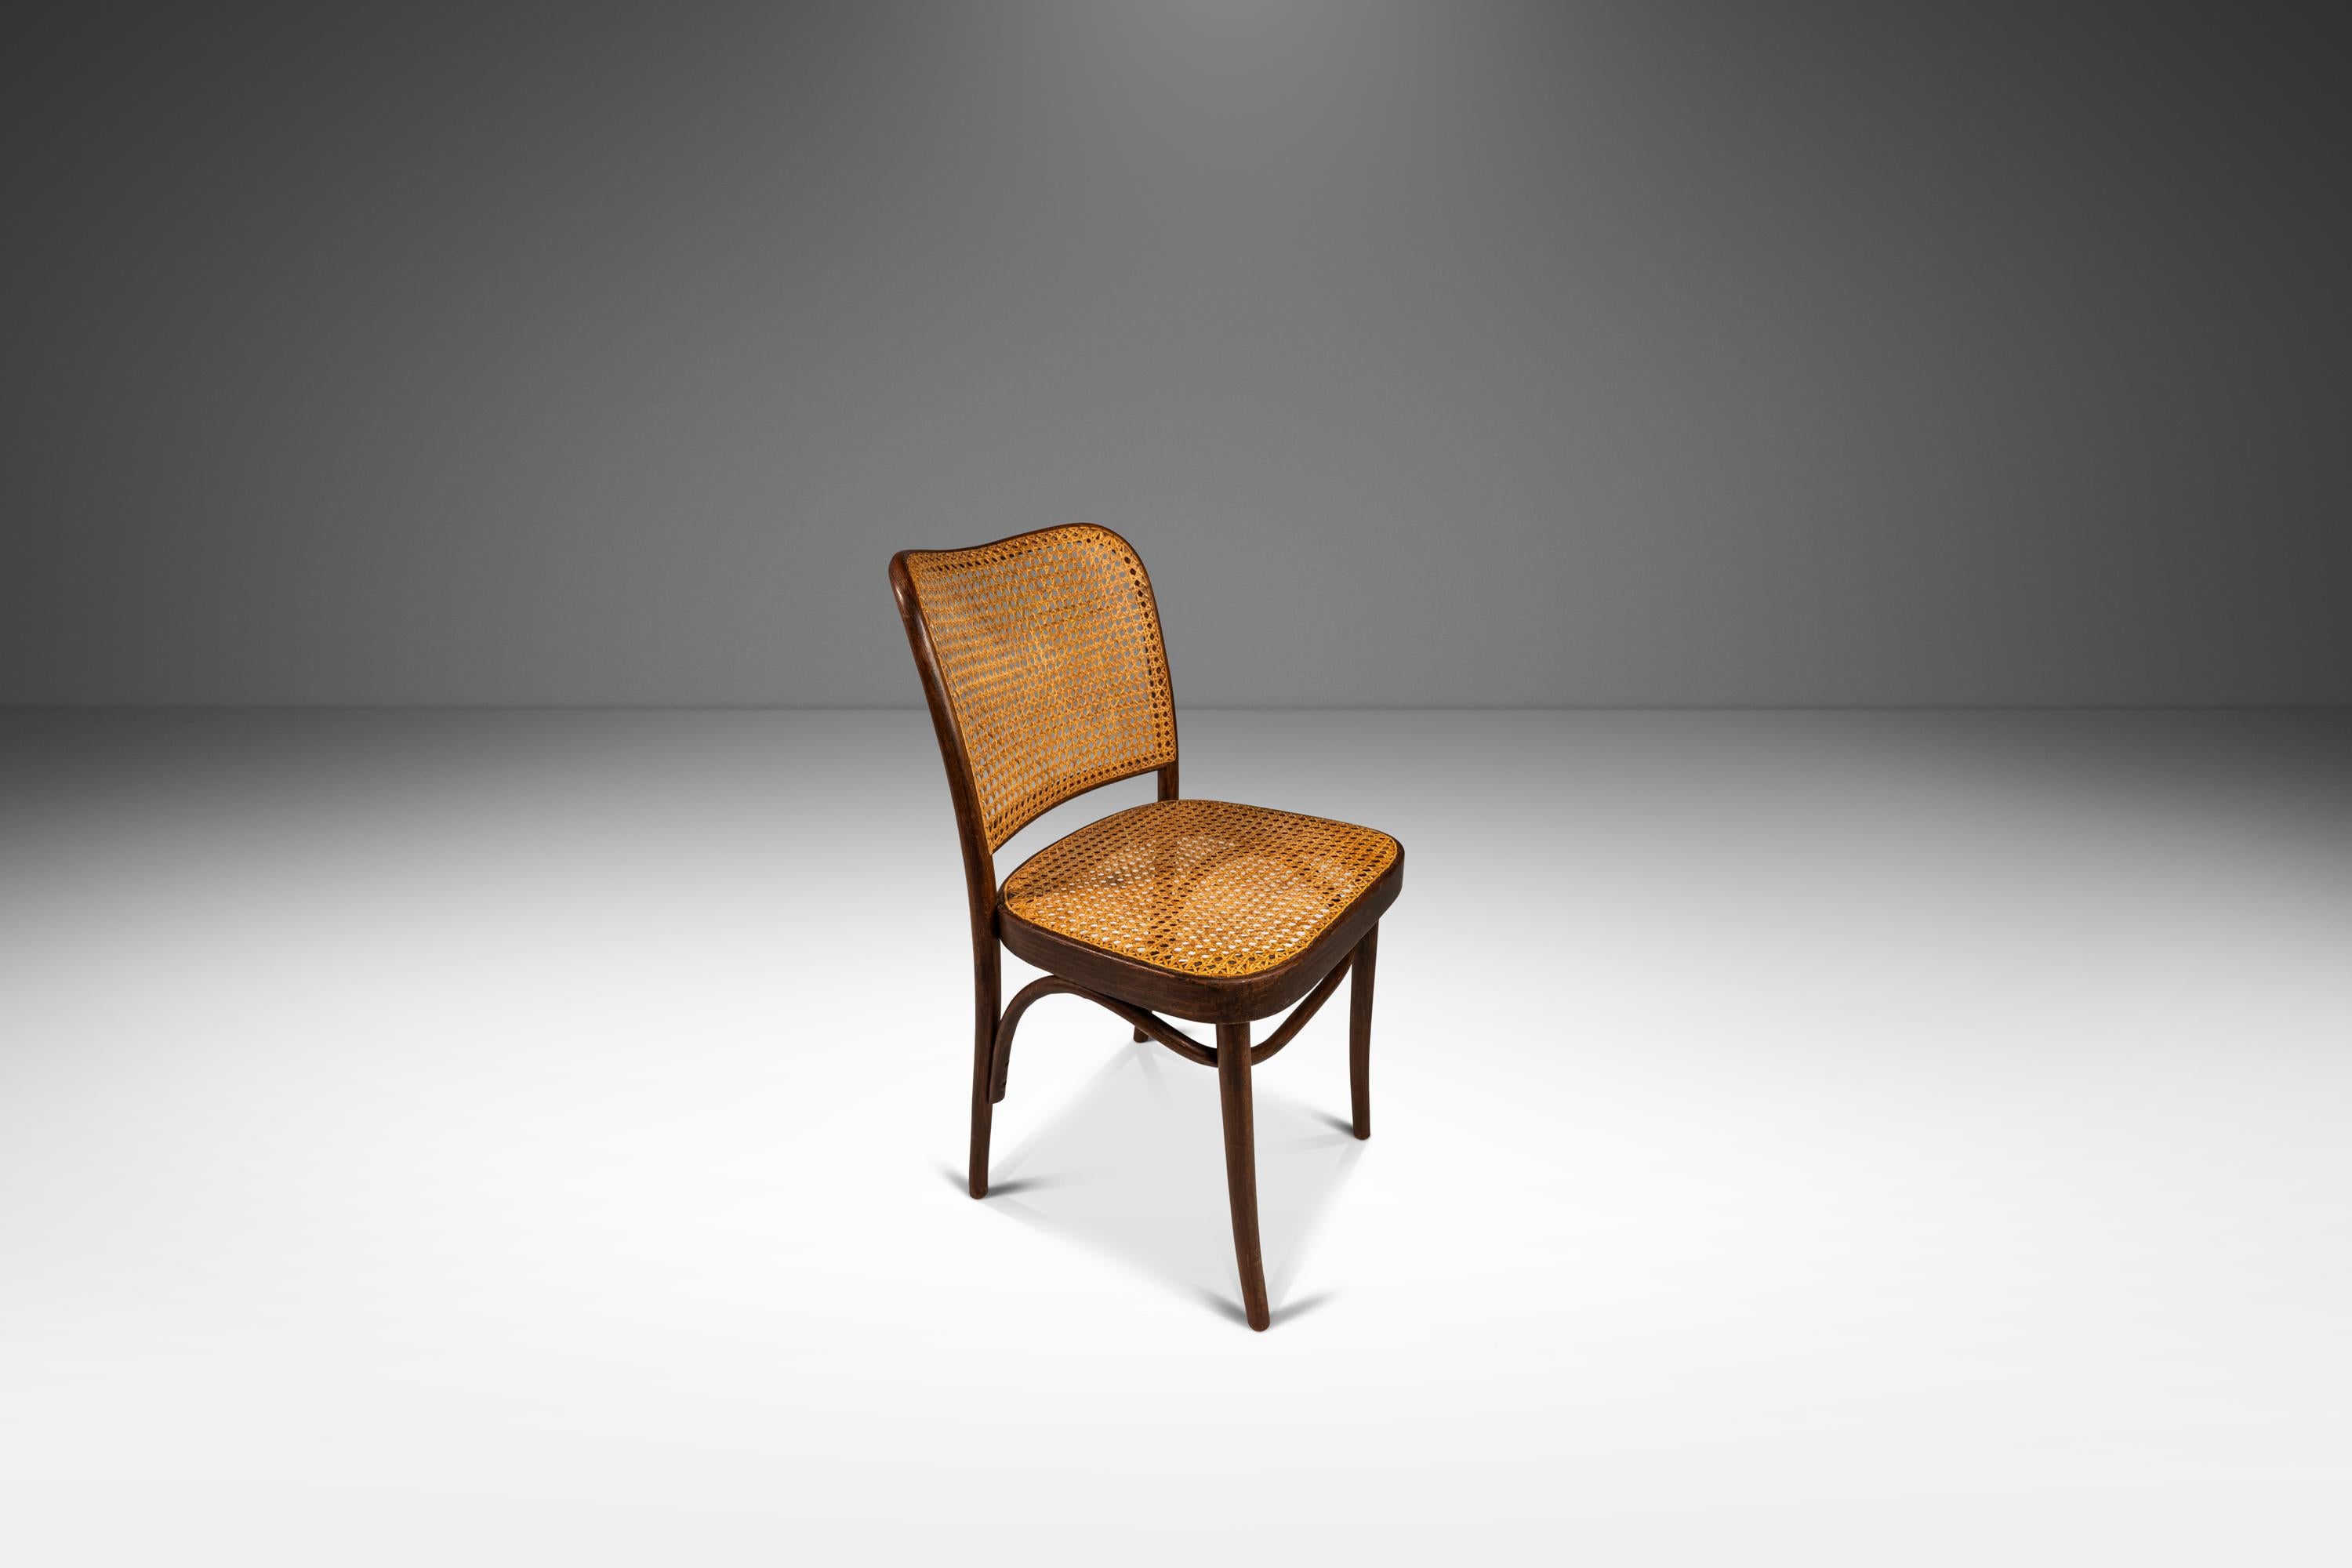 Bentwood Prague Model 811 Chair in Walnut by Josef Frank, Poland, c. 1960s For Sale 3